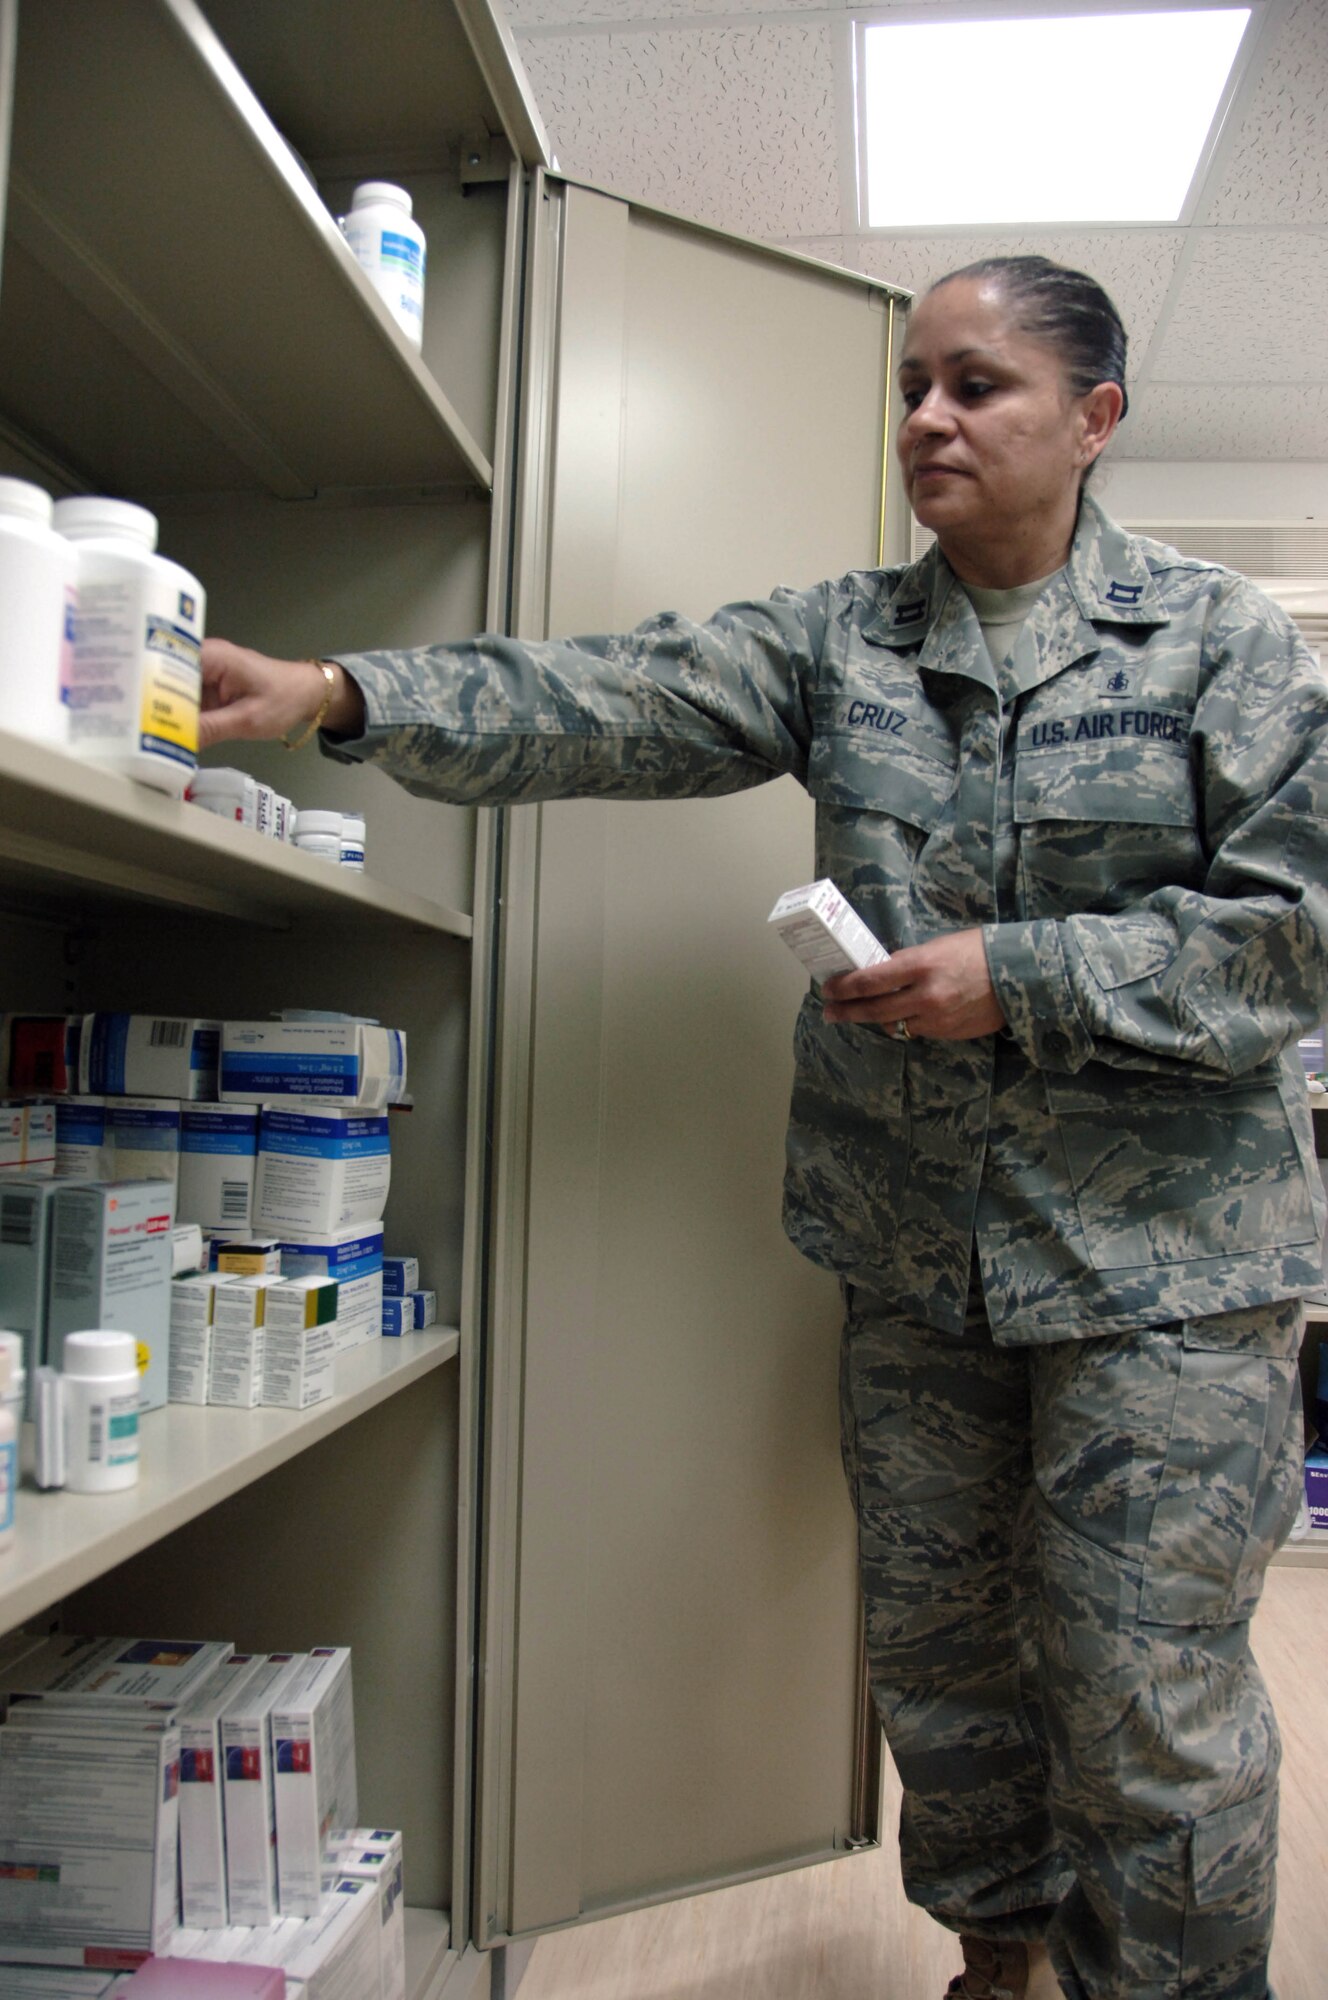 SOUTHWEST ASIA -- Capt. Lourdes Cruz, an Air Force nurse and officer in charge of the 380th Expeditionary Medical Group medical clinic, inventories medications here. The clinic has a full pharmacy and has the capability to diagnose and treat most common injuries and illnesses. (U.S. Air Force photo by Staff Sgt. Mike Andriacco) (Released)